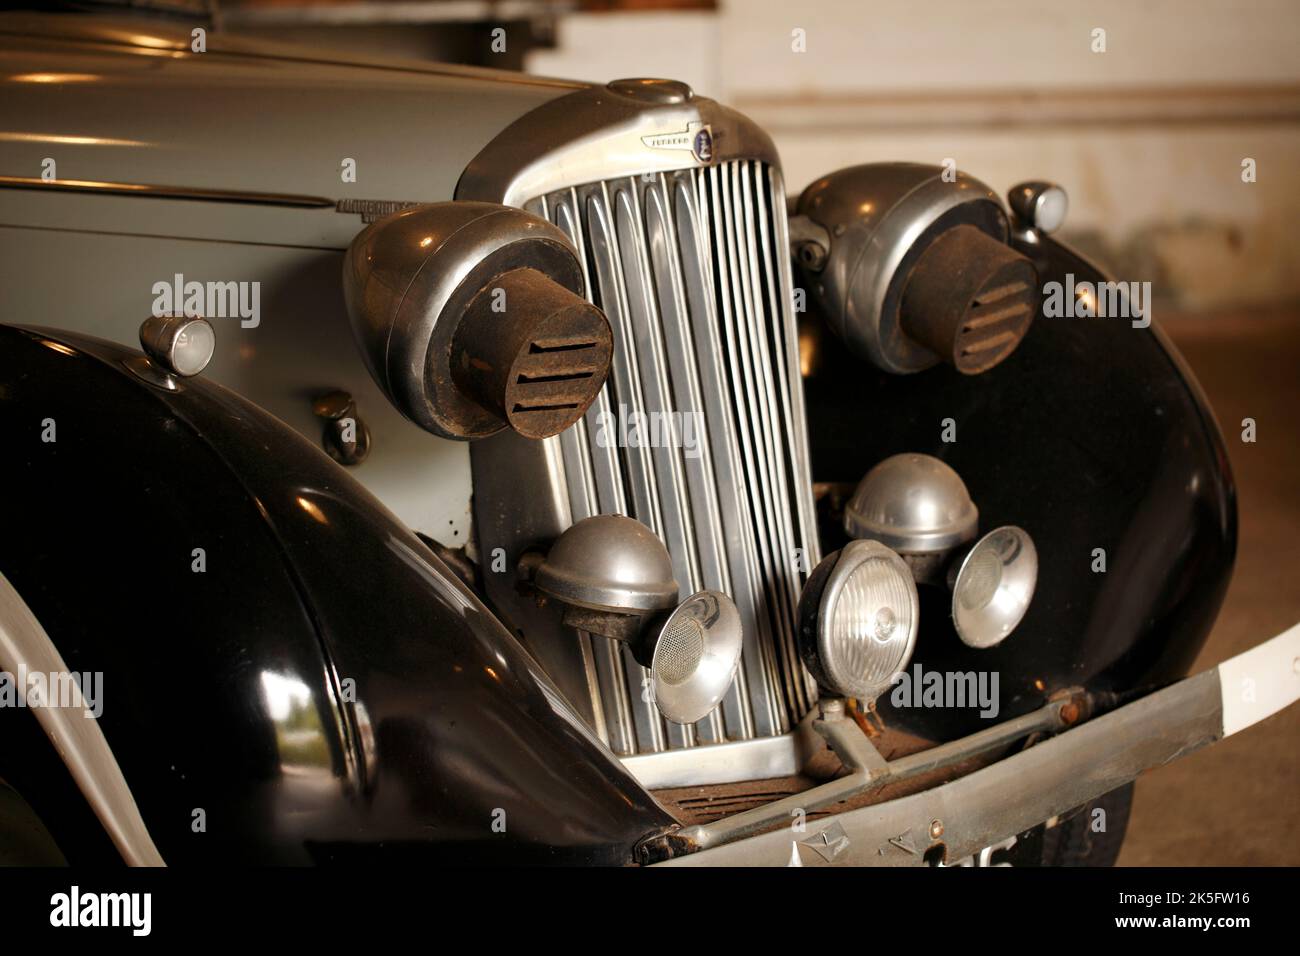 Sunbeam Talbot Supreme wartime car with hooded light covers. WW2, WWII. Stock Photo